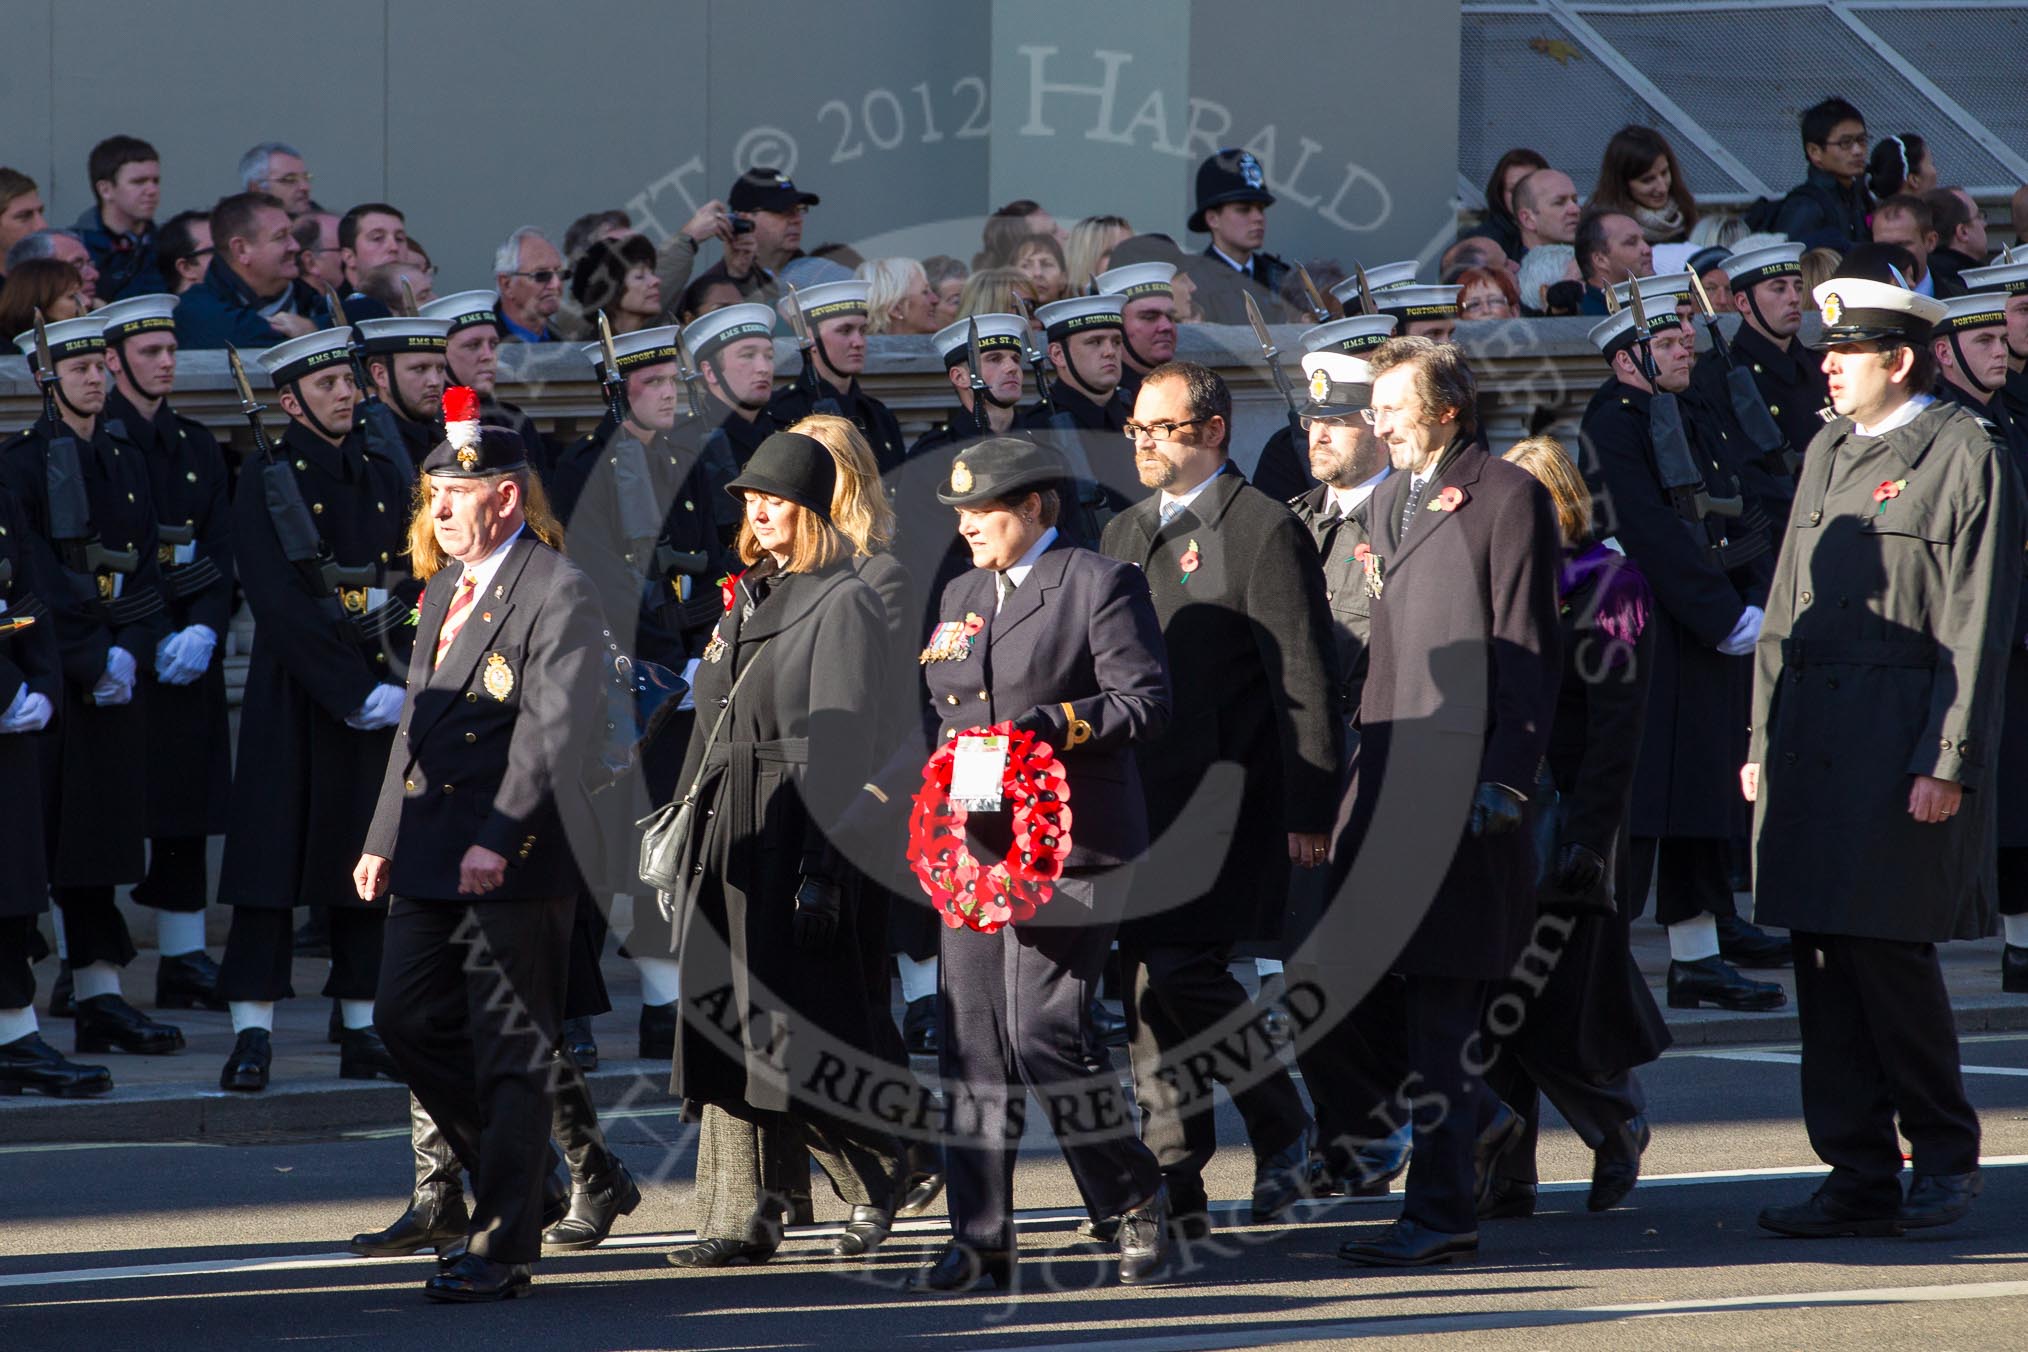 Remembrance Sunday 2012 Cenotaph March Past: Unlisted group - information appreciated!.
Whitehall, Cenotaph,
London SW1,

United Kingdom,
on 11 November 2012 at 12:16, image #1764